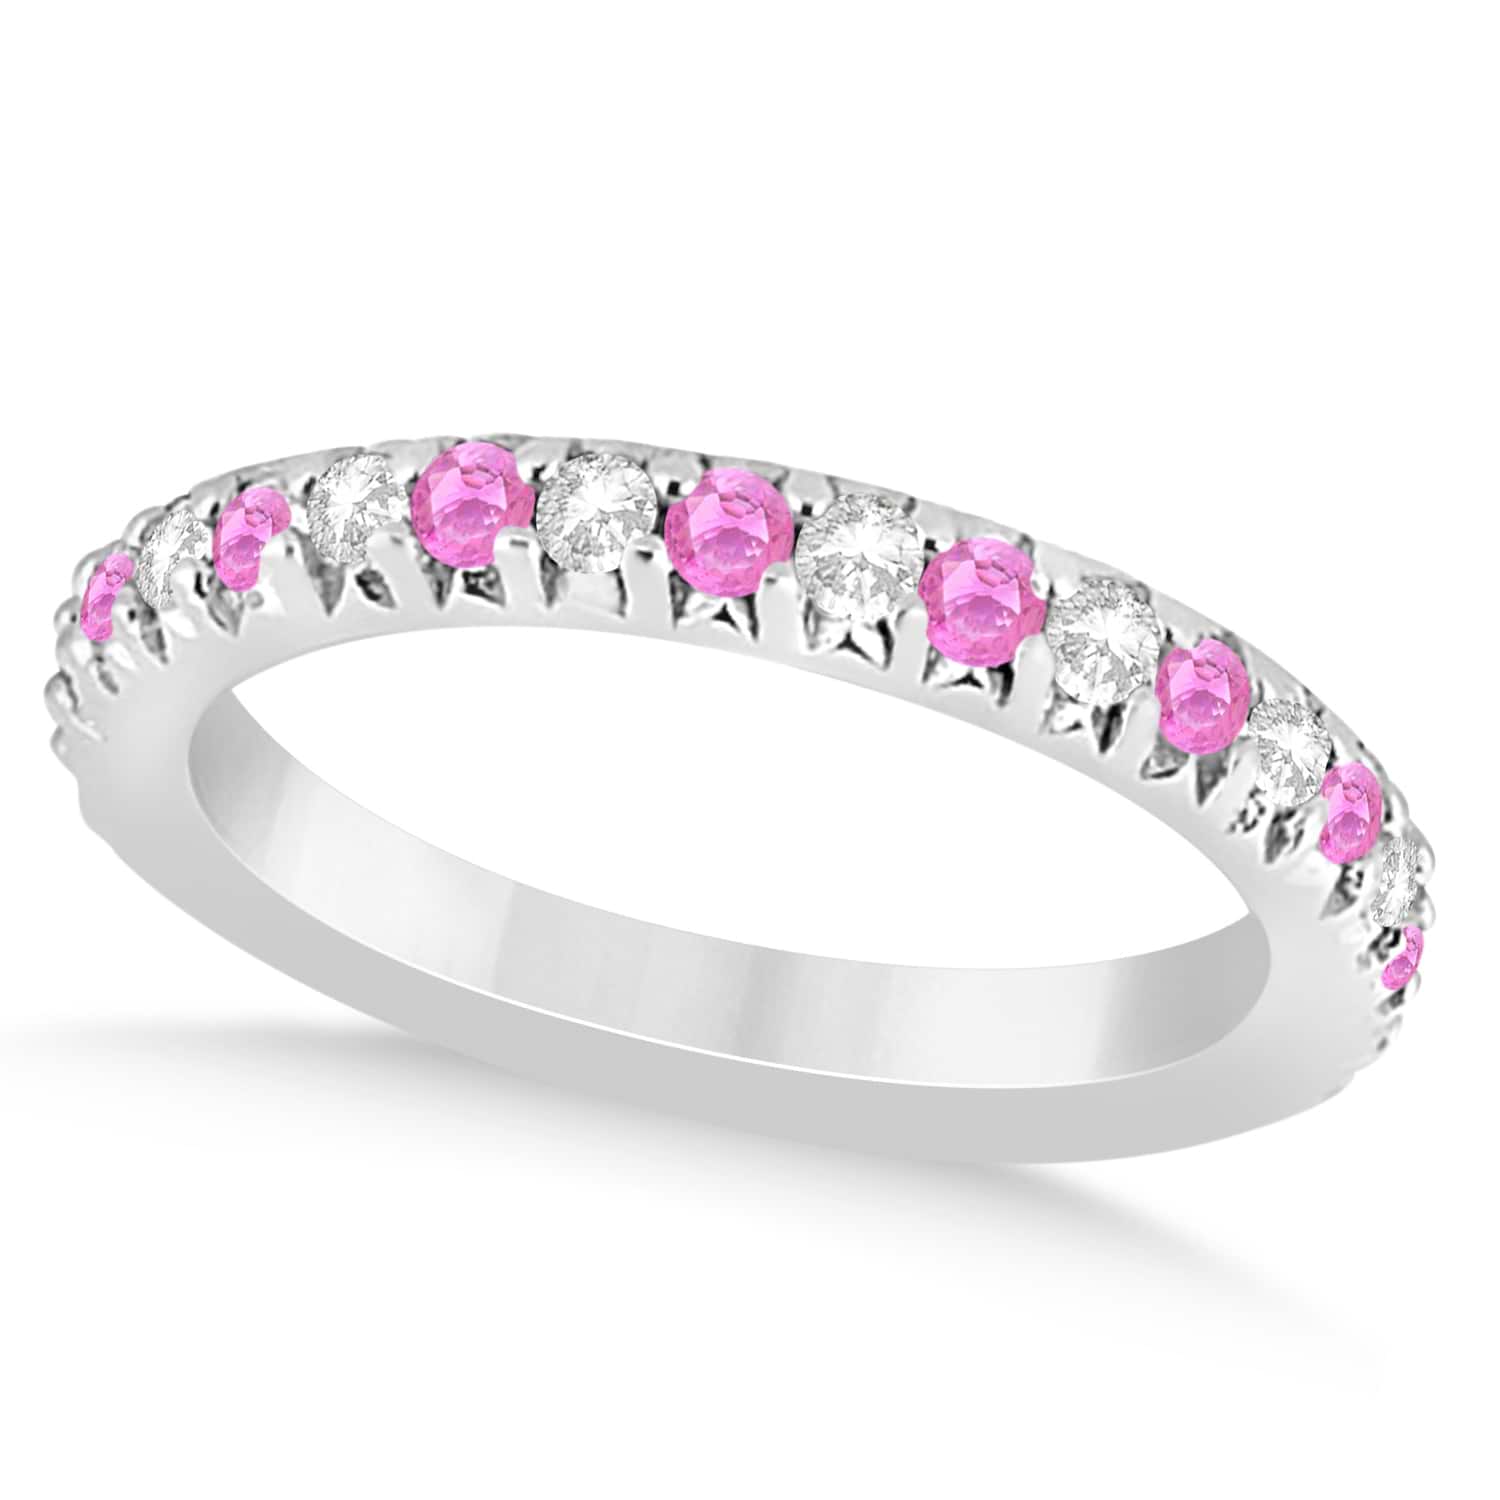 Pink Sapphire & Diamond Accented Wedding Band 14k White Gold 0.60ct